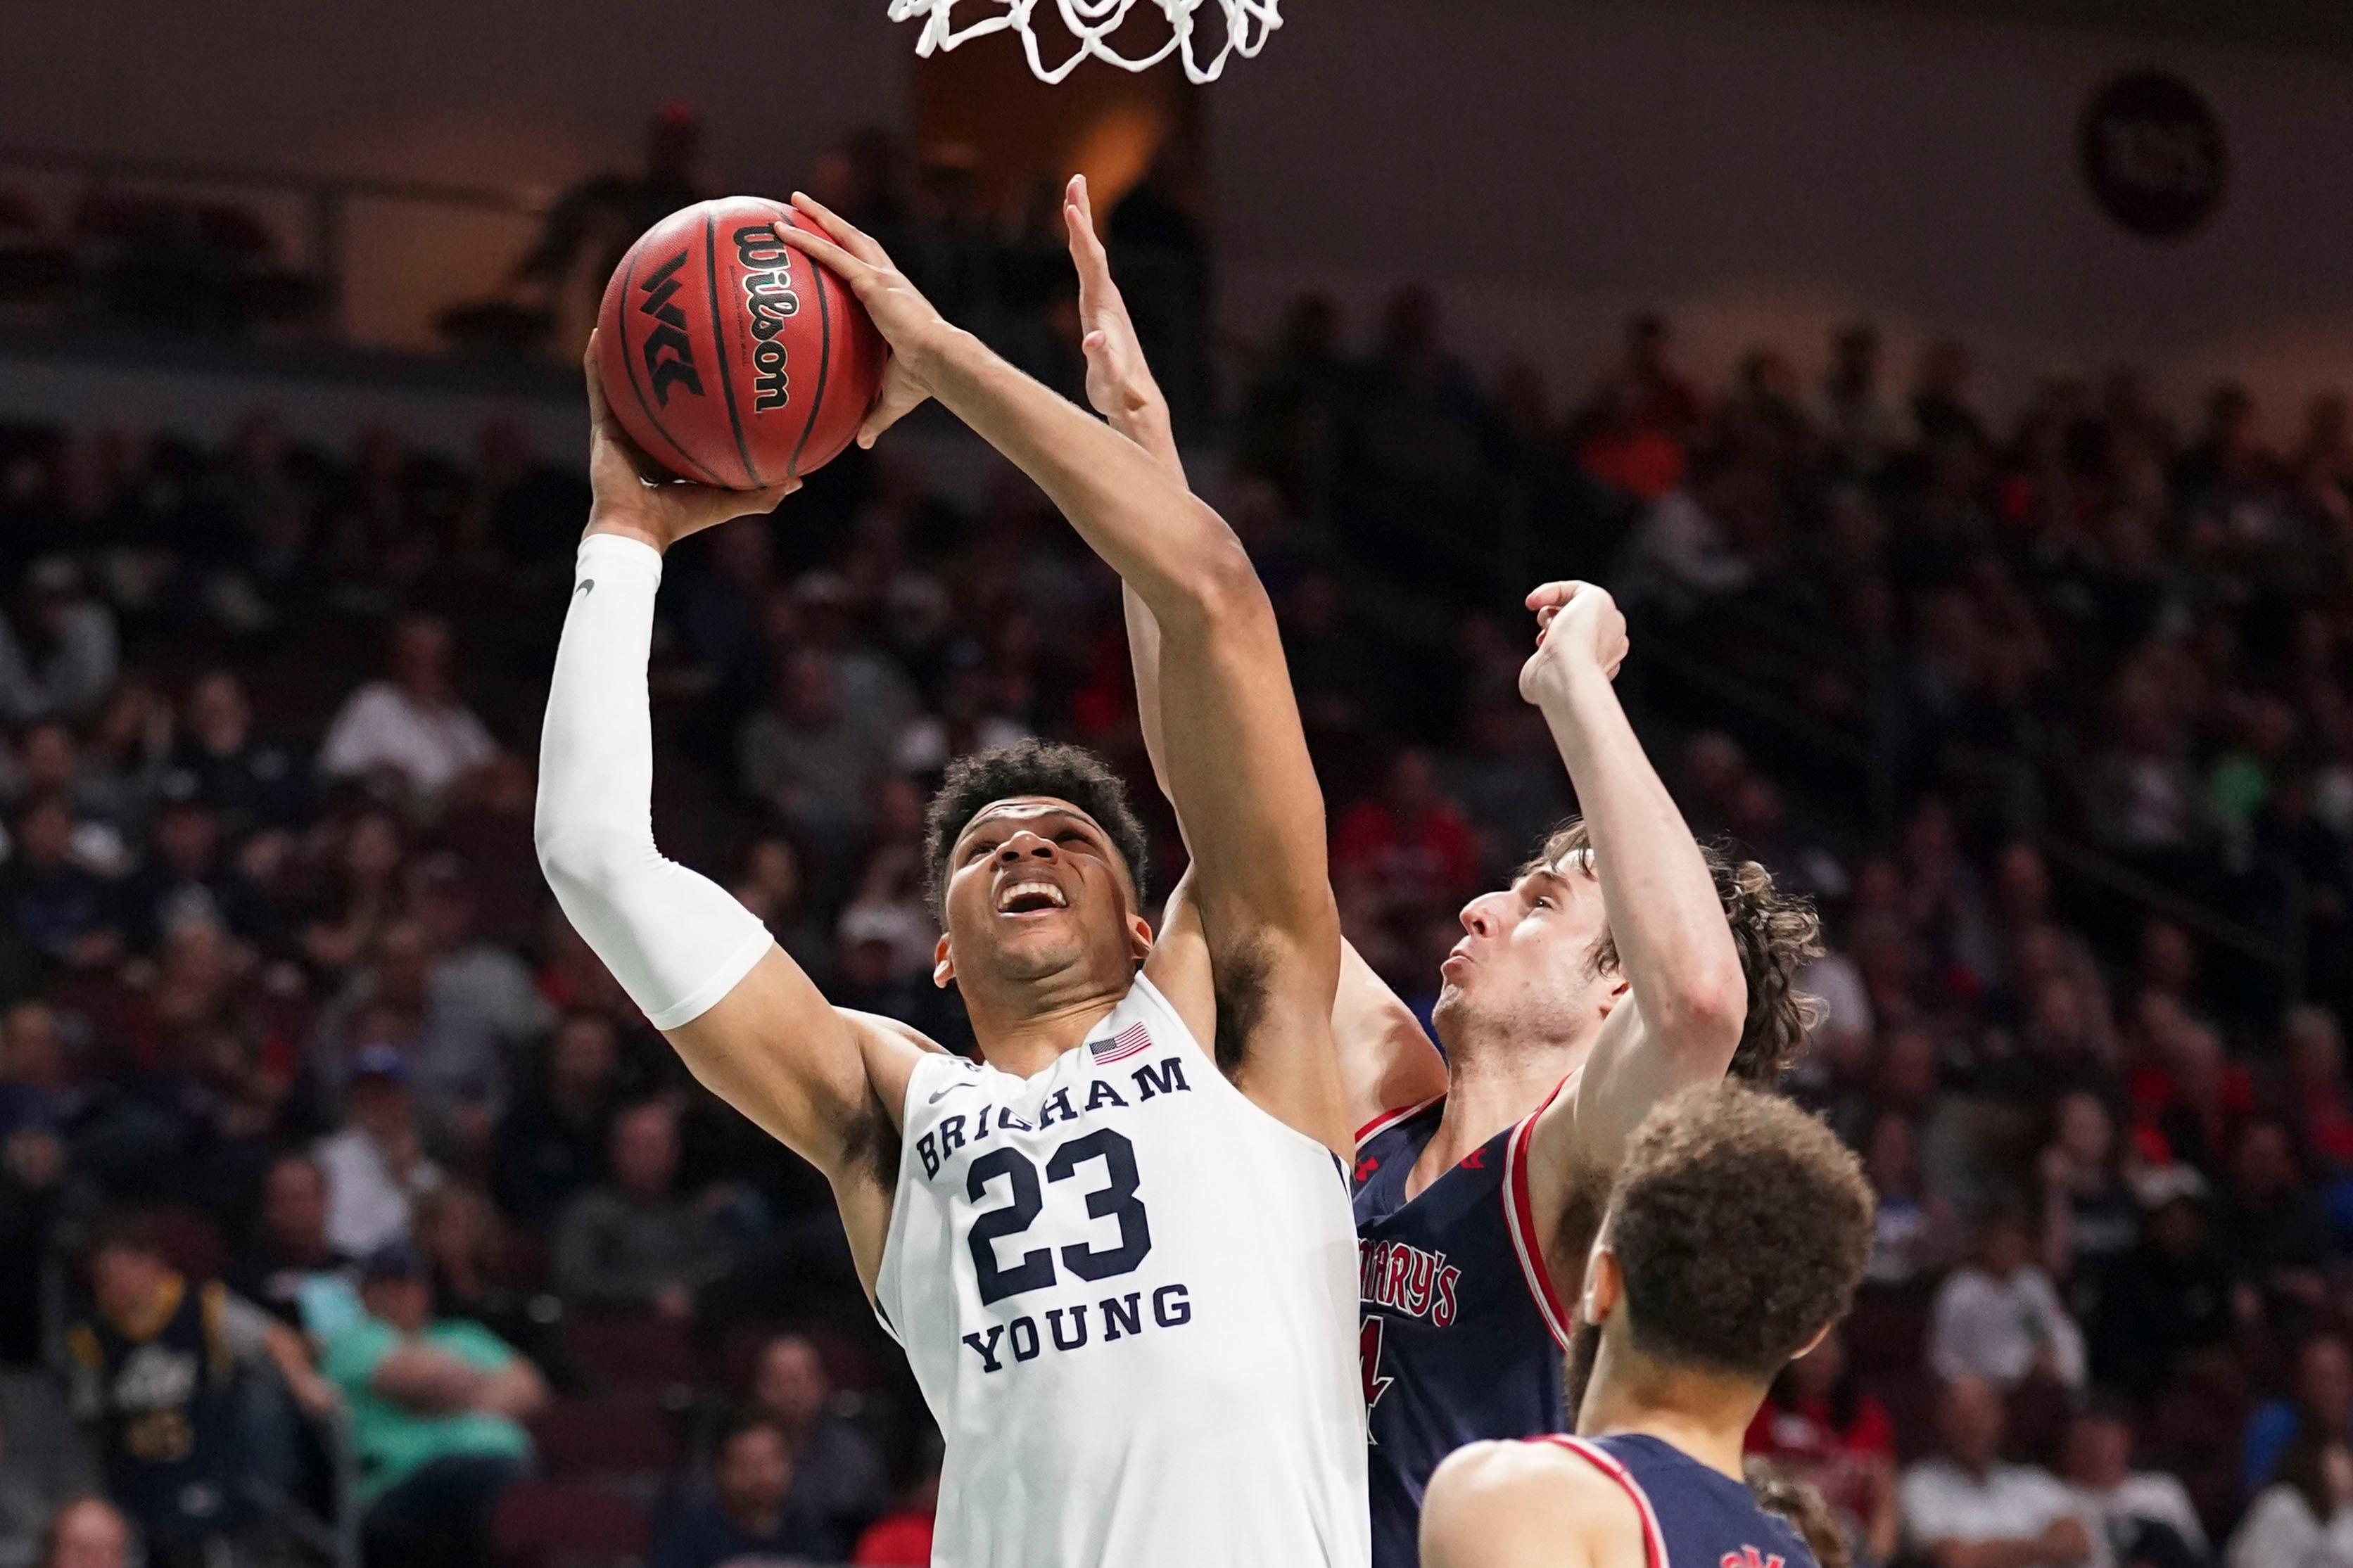 March 9, 2020; Las Vegas, NV, USA; BYU Cougars forward Yoeli Childs (23) shoots the basketball against the Saint Mary's Gaels during the second half during the semifinal game in the WCC Basketball Championships at Orleans Arena. / Kyle Terada-USA TODAY Sports